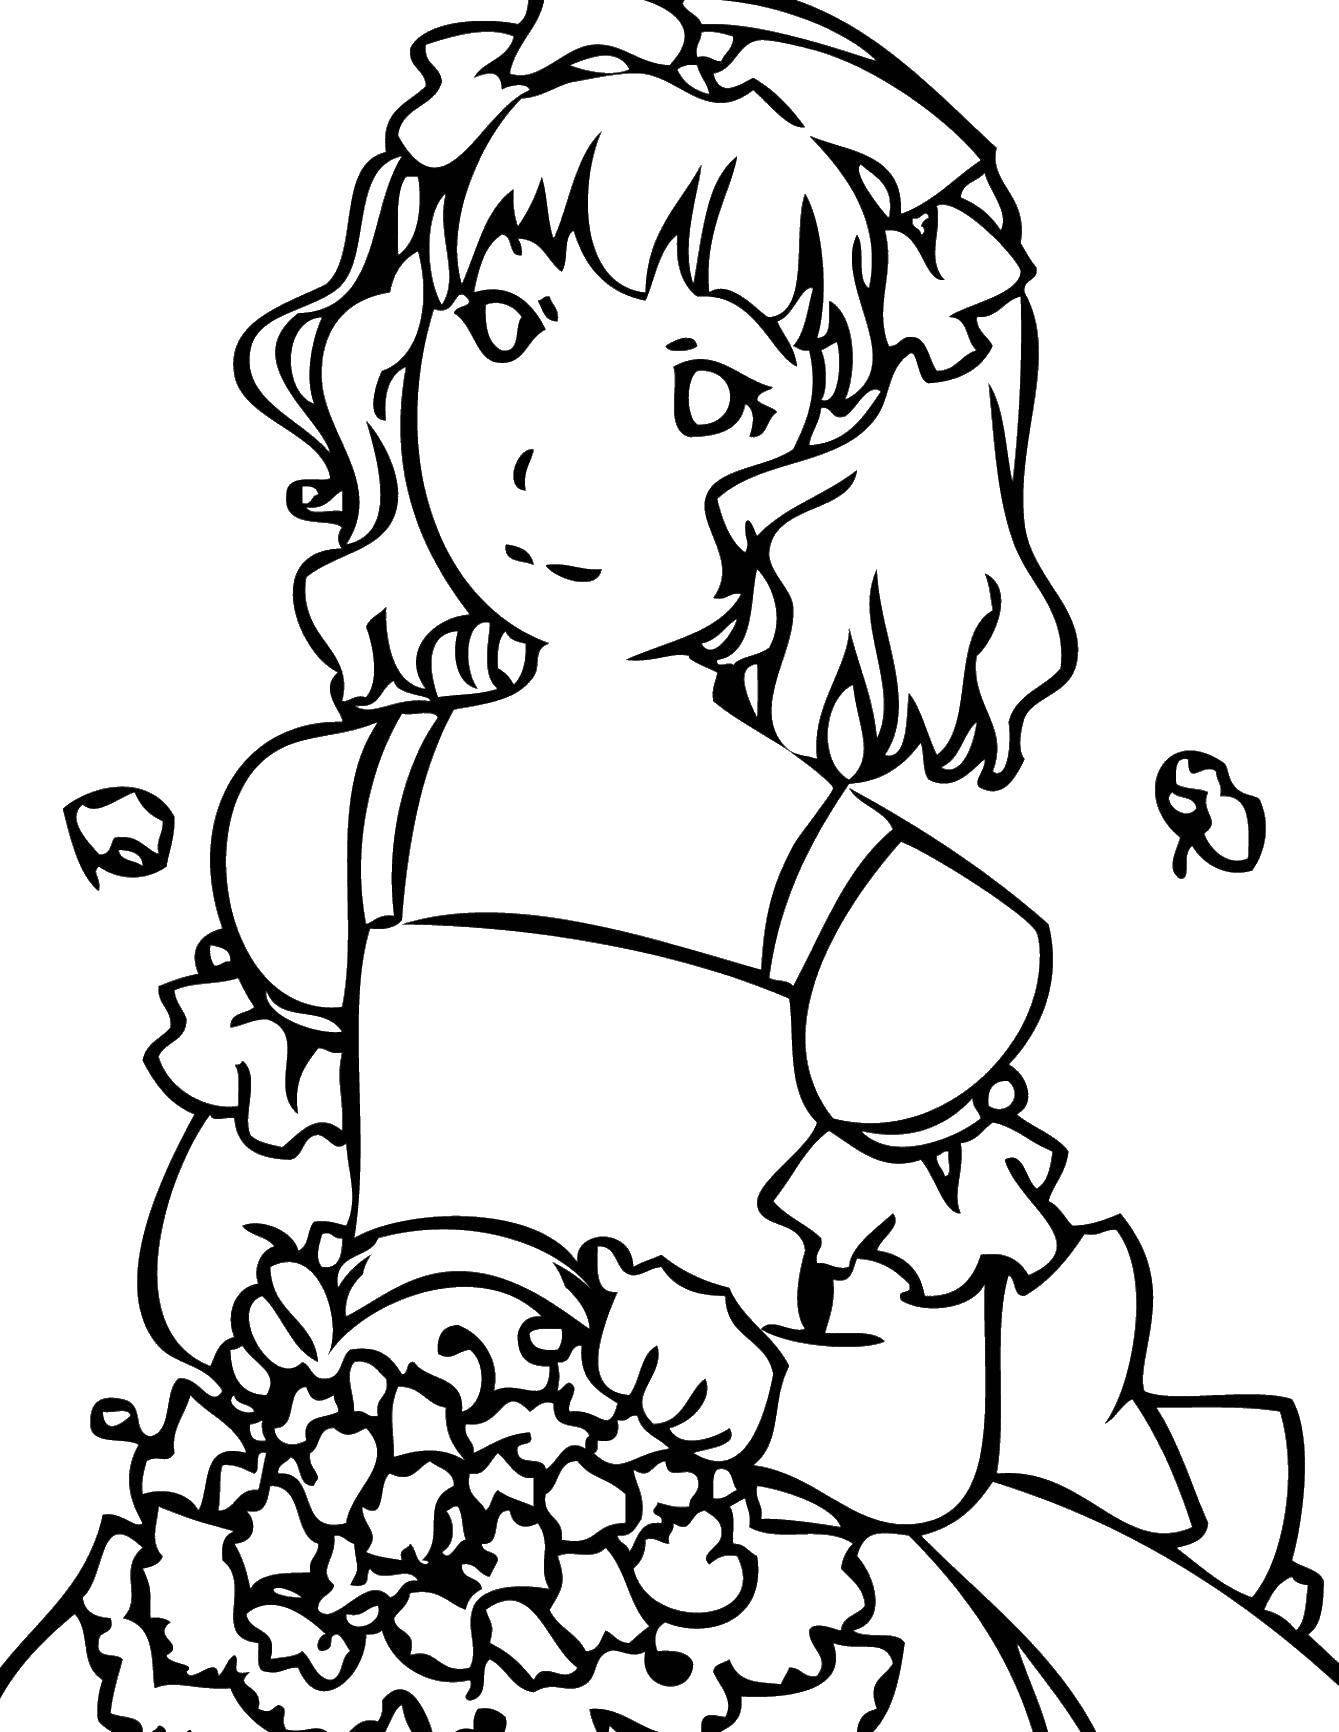 Coloring Girl with flowers. Category For girls. Tags:  Children, girl.